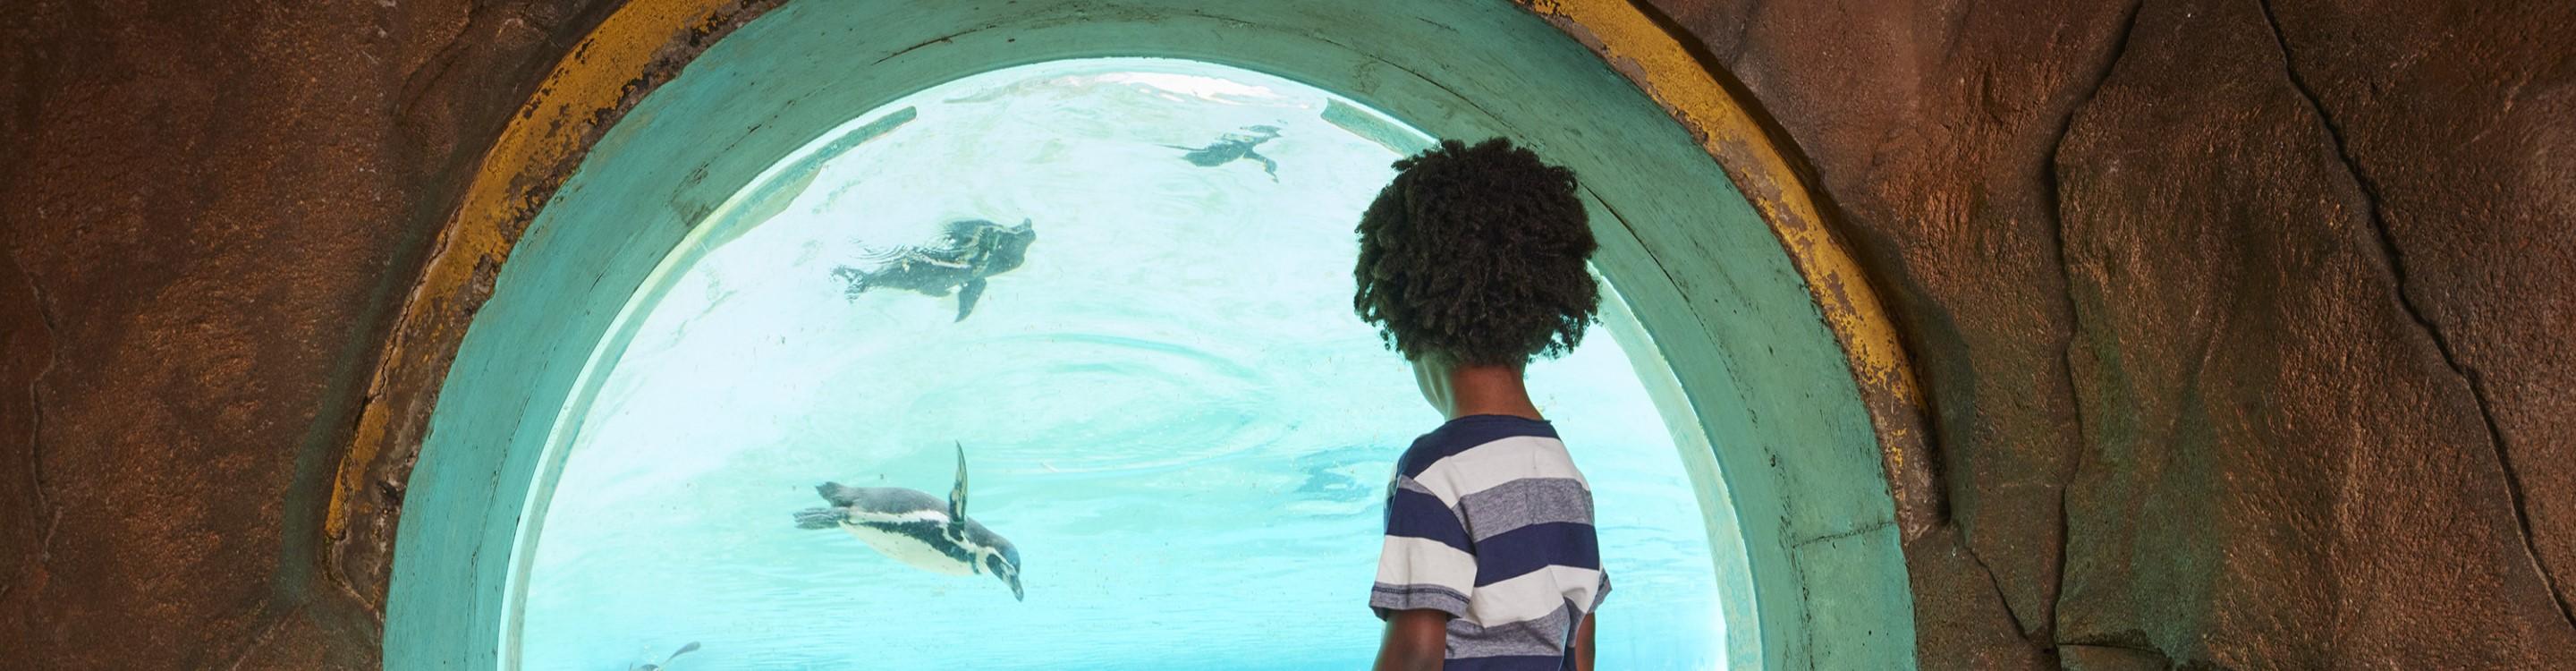 Young child watching penguins swimming through an underwater viewing window